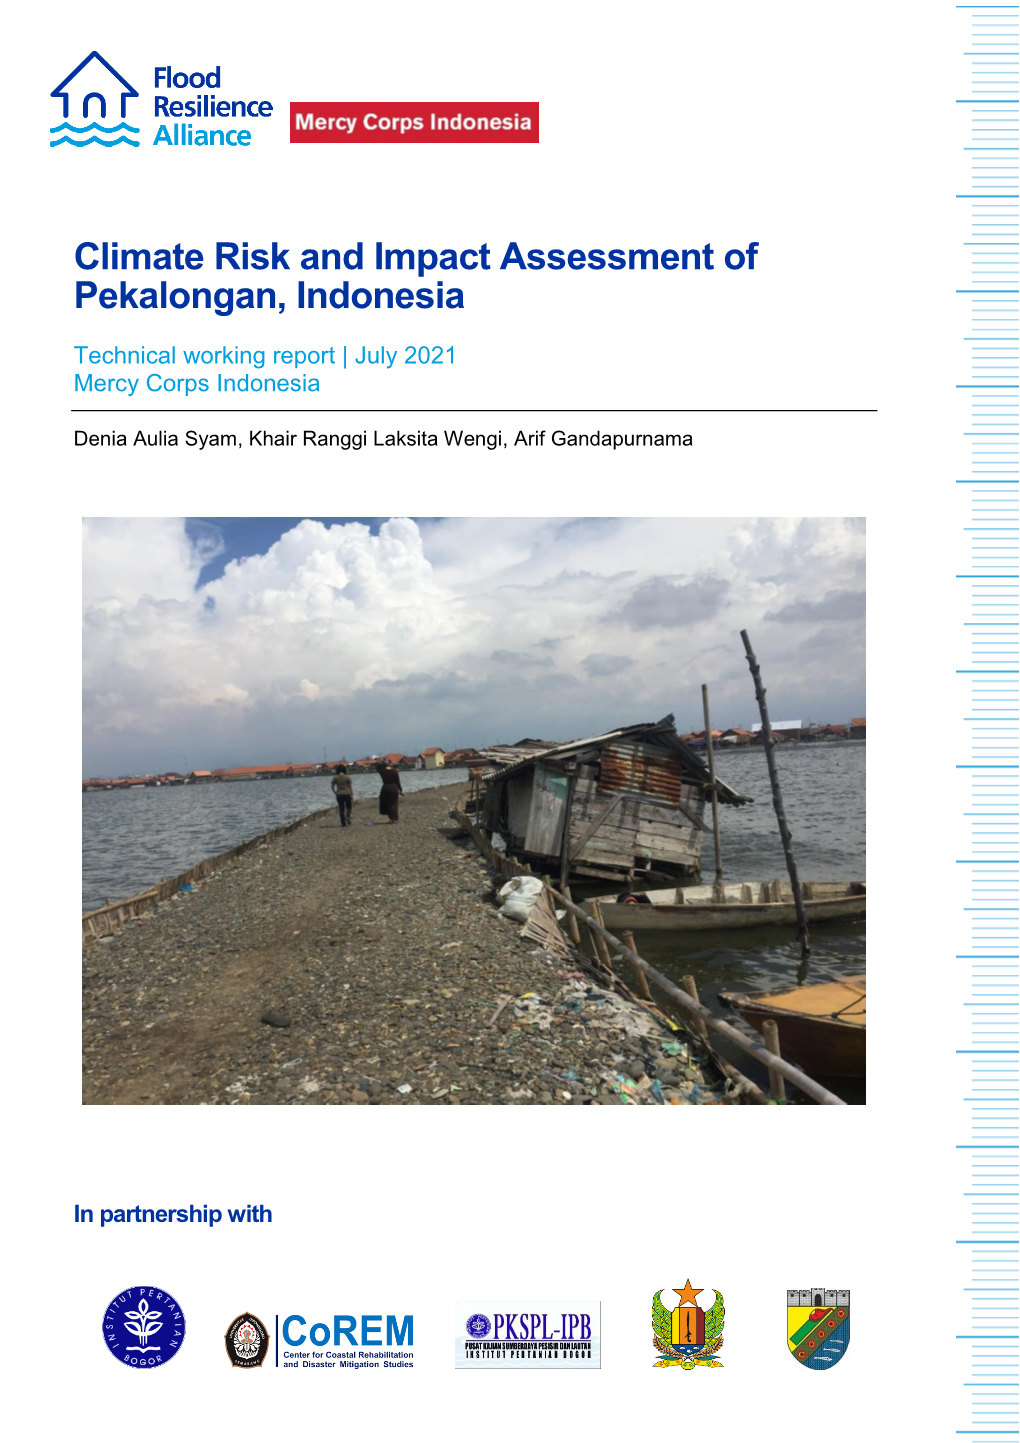 Climate Risk and Impact Assessment of Pekalongan, Indonesia